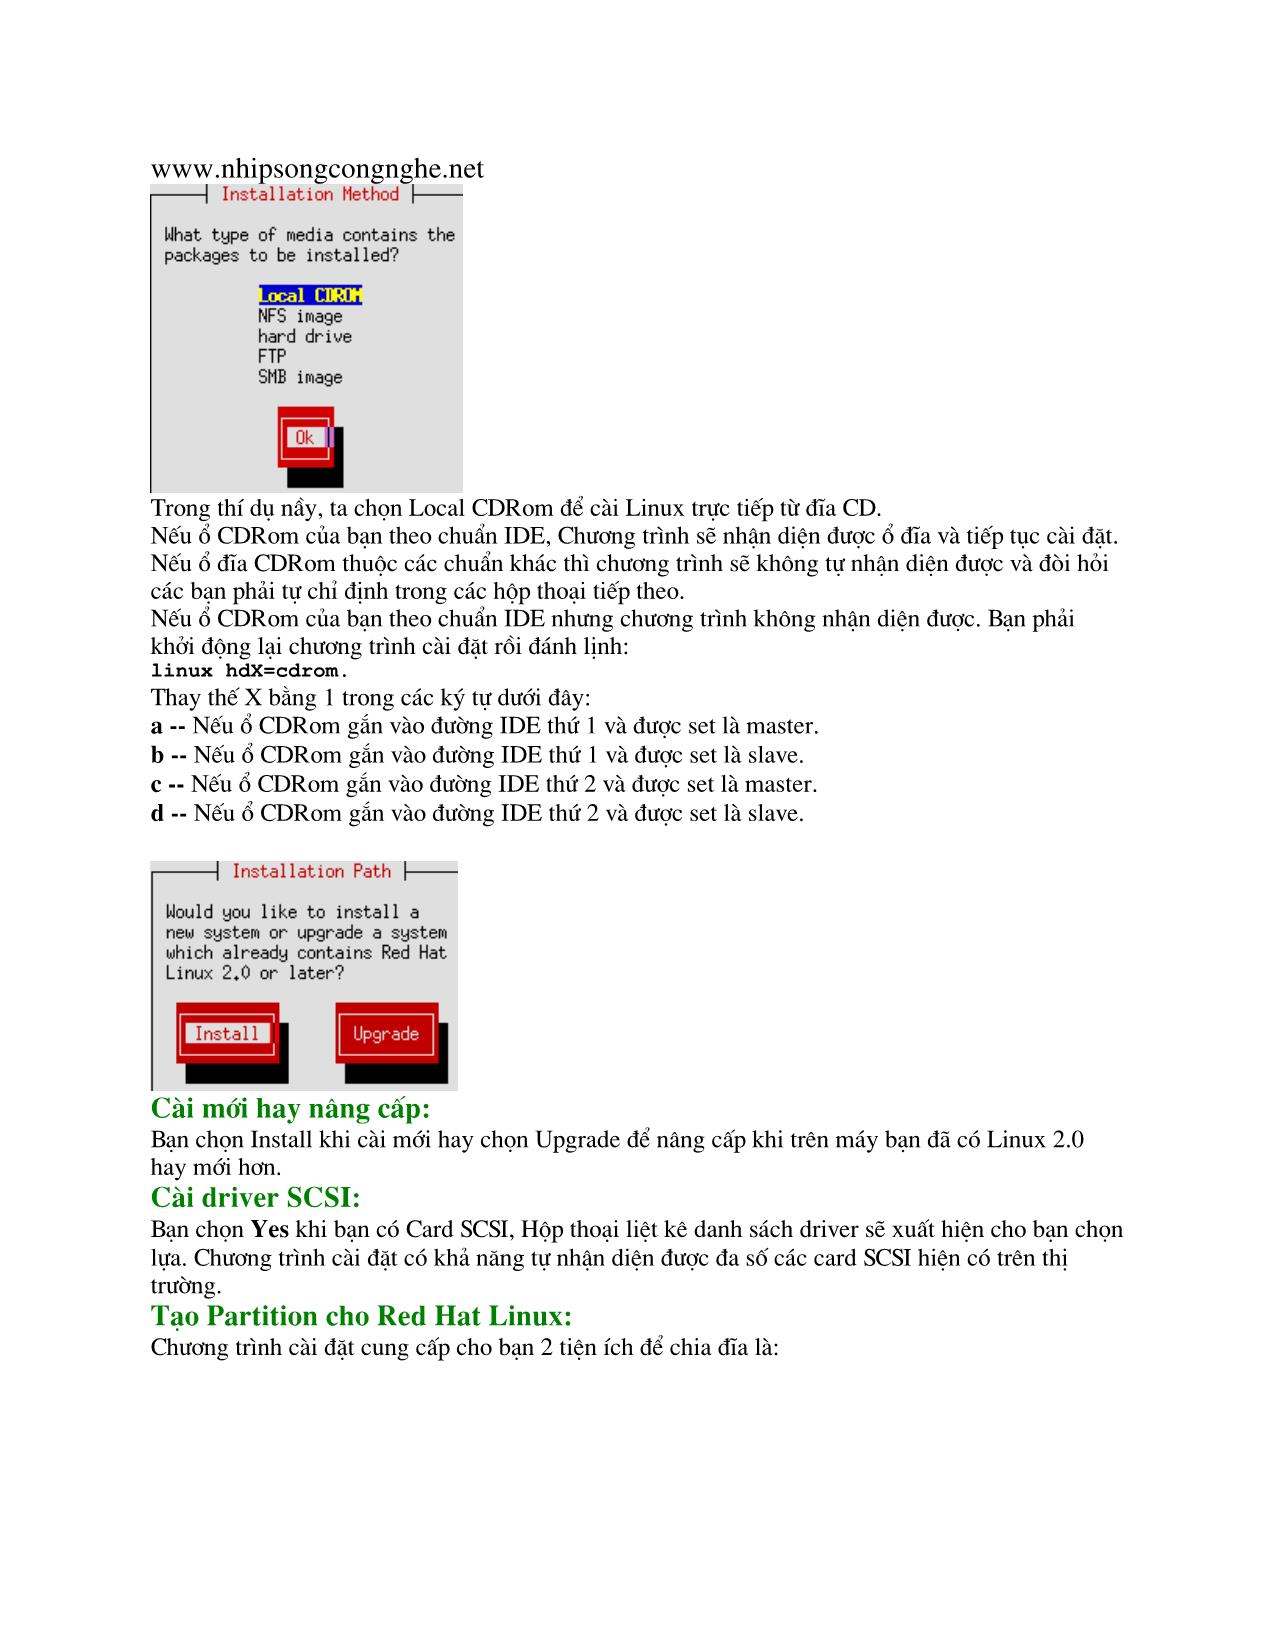 Red Hat Linux 5.1 trang 4